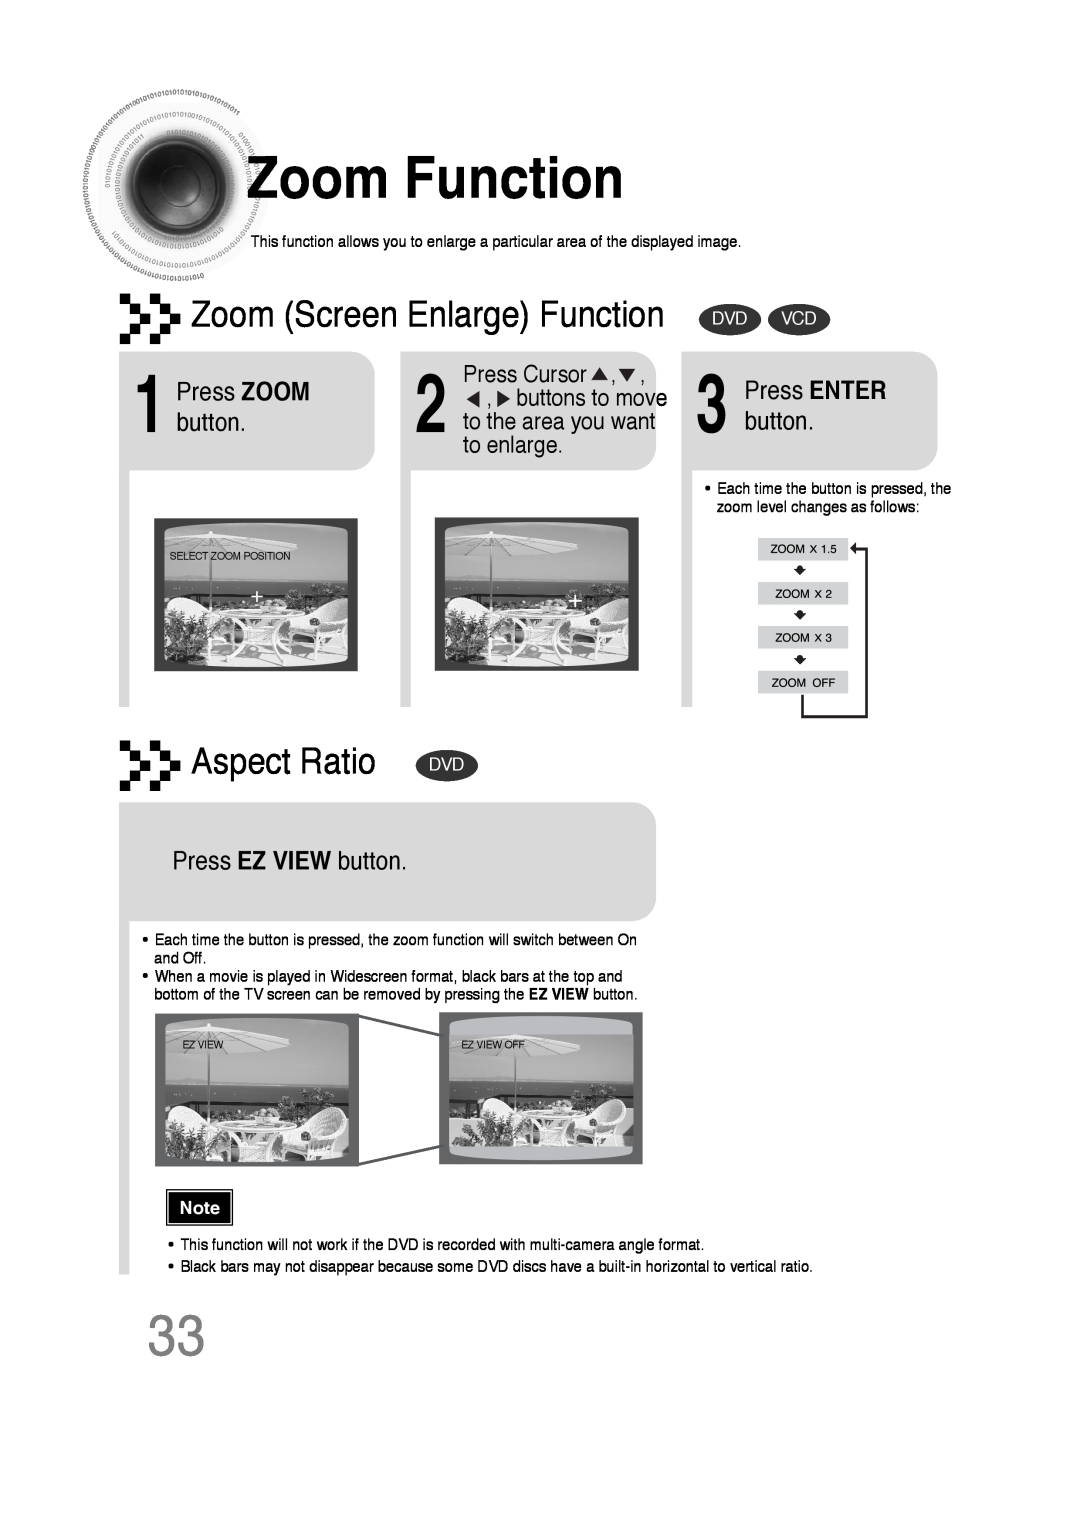 Samsung 20051111103302296 ZoomFunction, Zoom Screen Enlarge Function DVD VCD, Press ZOOM, Press EZ VIEW button 